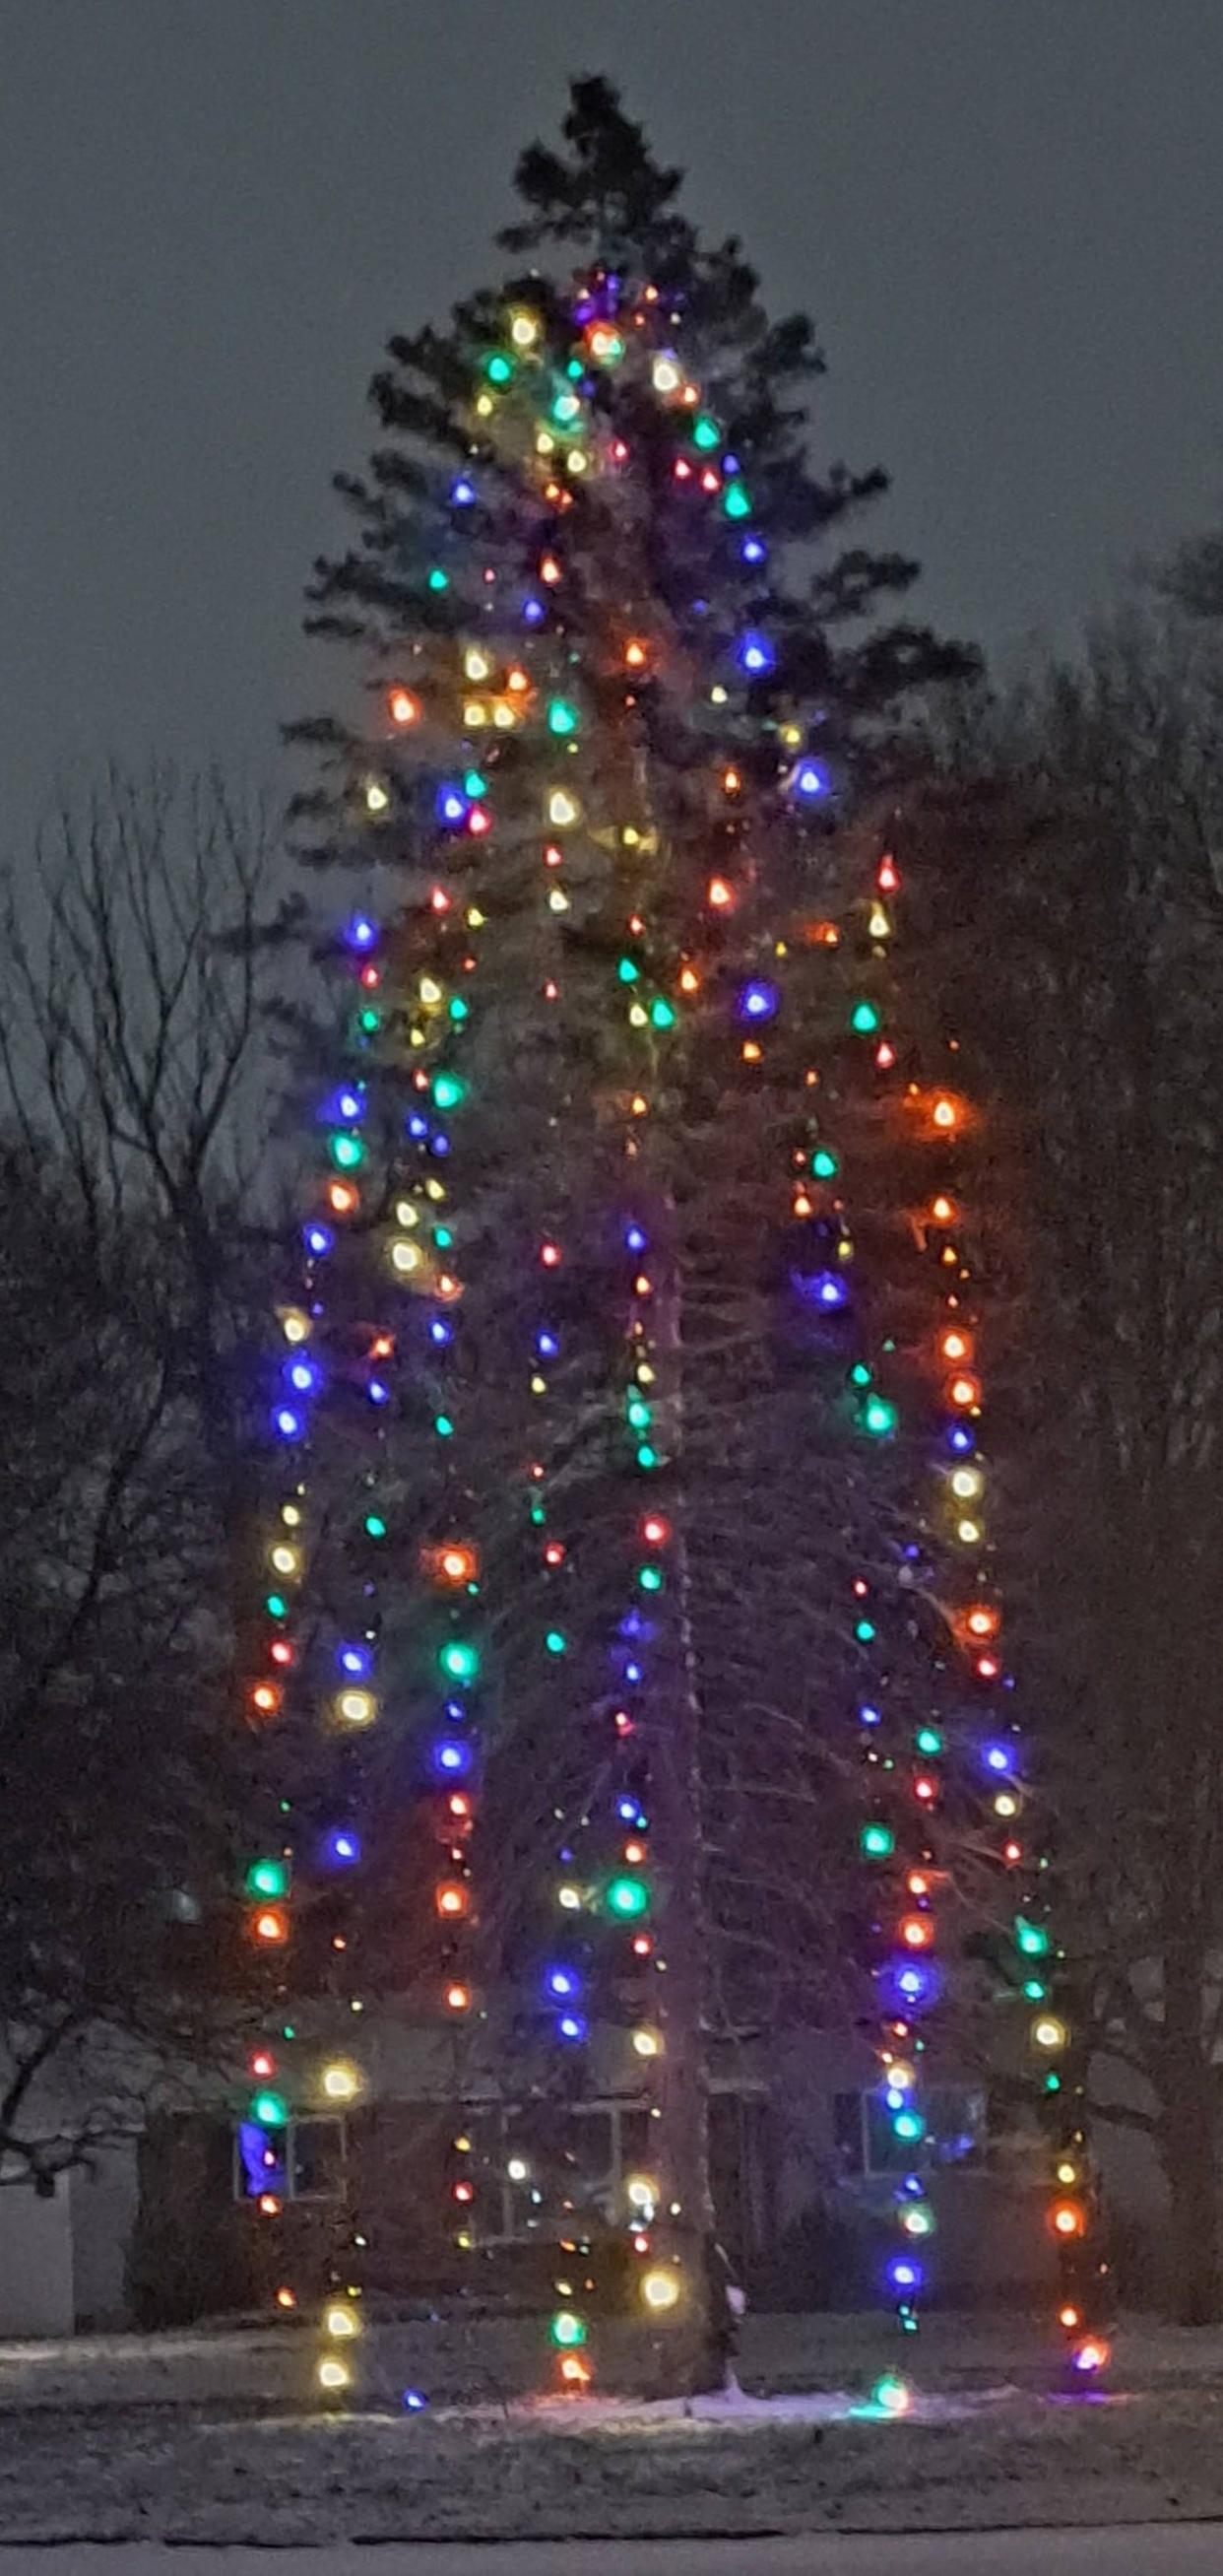 Here is how the spruce tree on Holiday Lane in Canandaigua looked over the holidays.